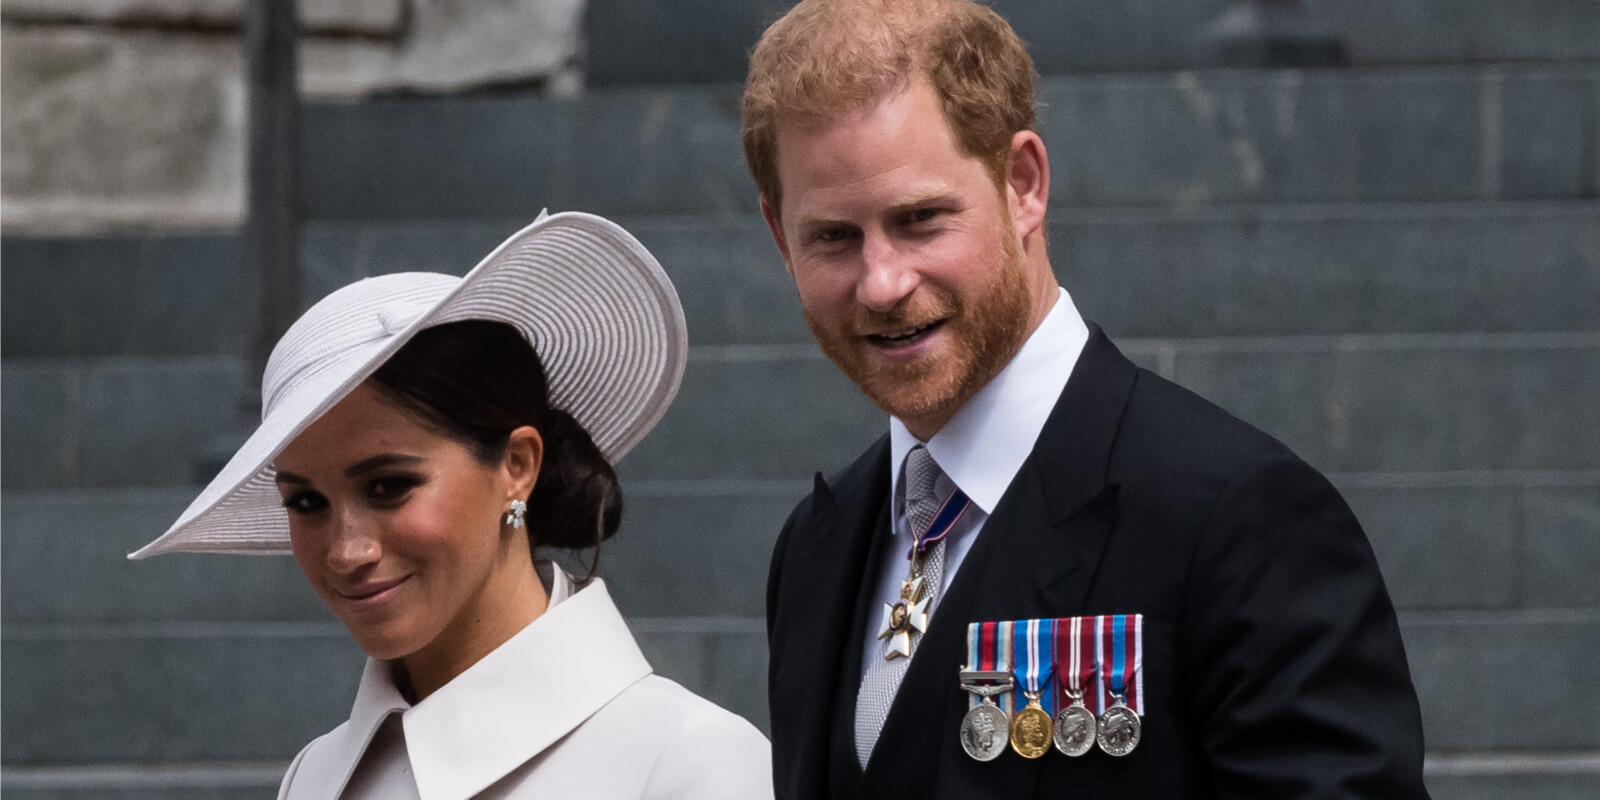 Meghan Markle and Prince Harry attend Service of Thanksgiving for The Queen's during the Platinum Jubilee celebrations in London, United Kingdom on June 03, 2022.